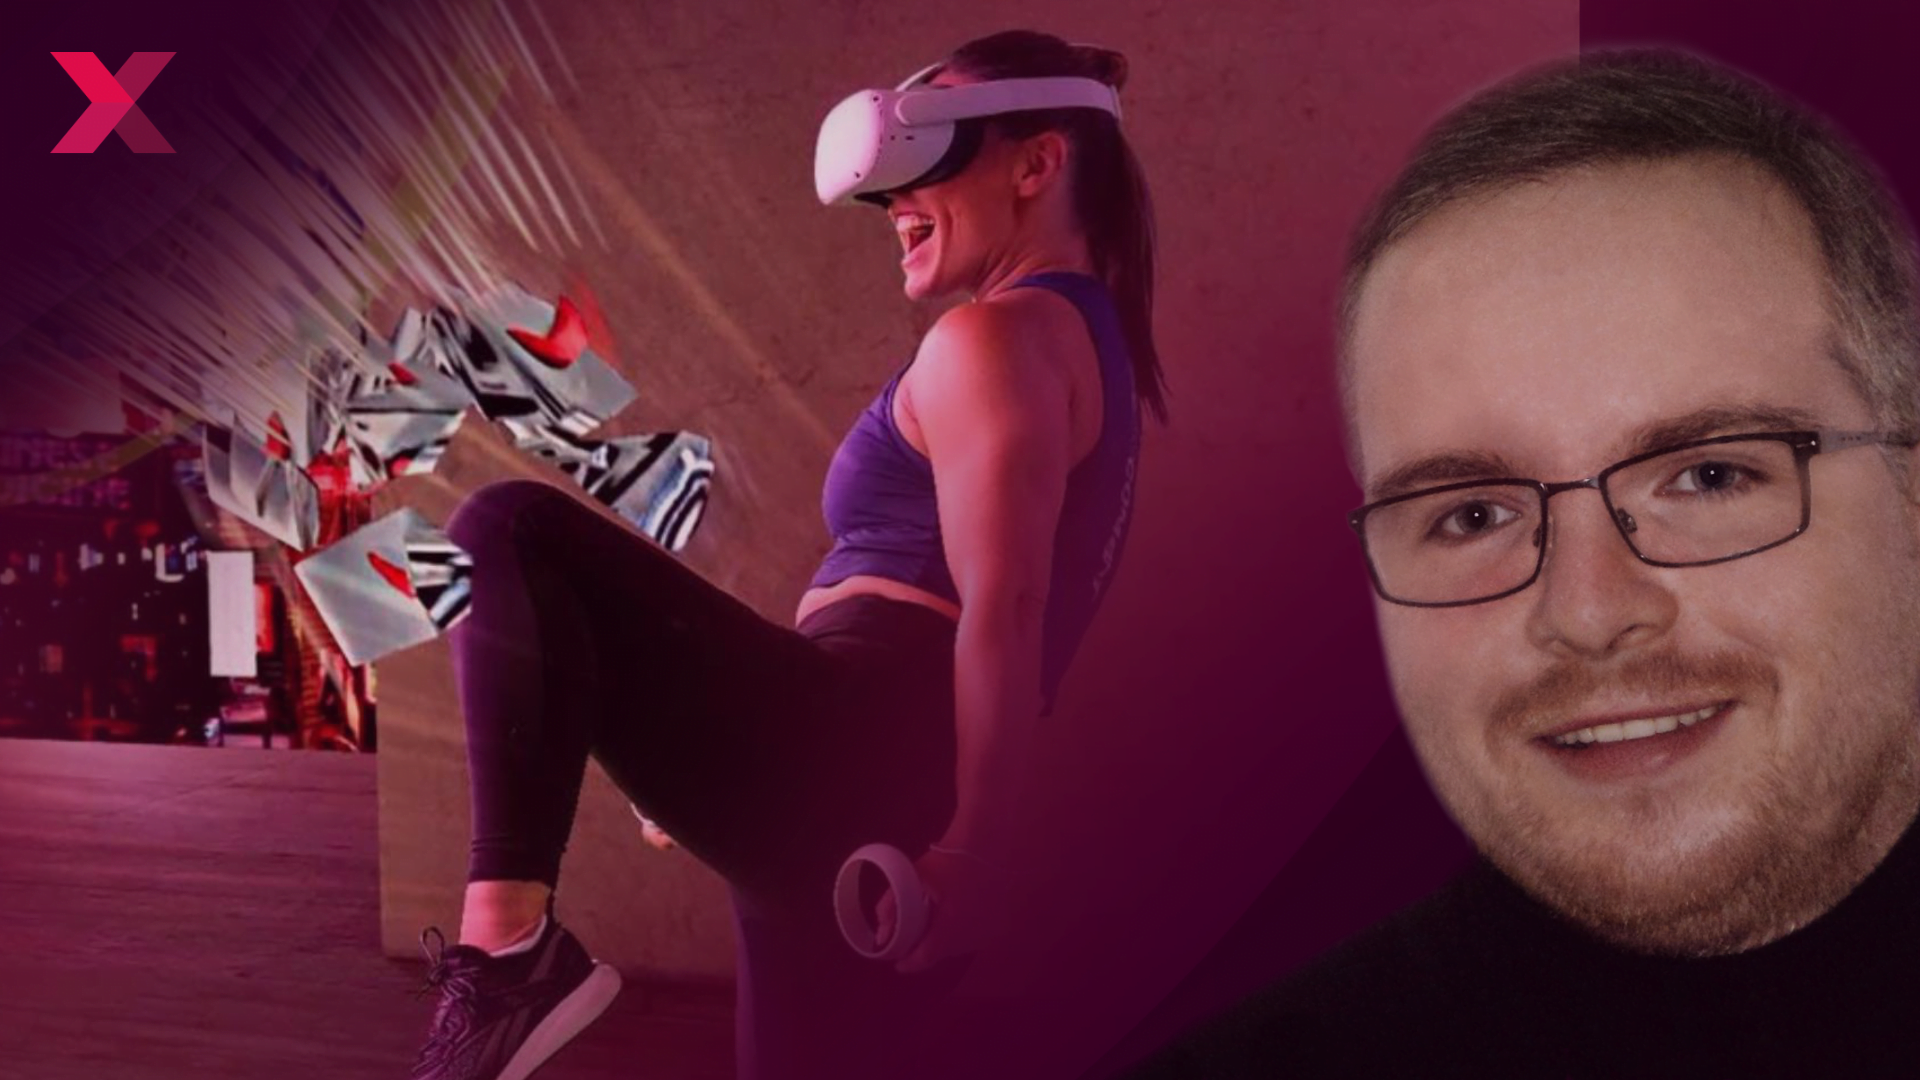 Ow, ow, the pain! Love, Virtual Reality